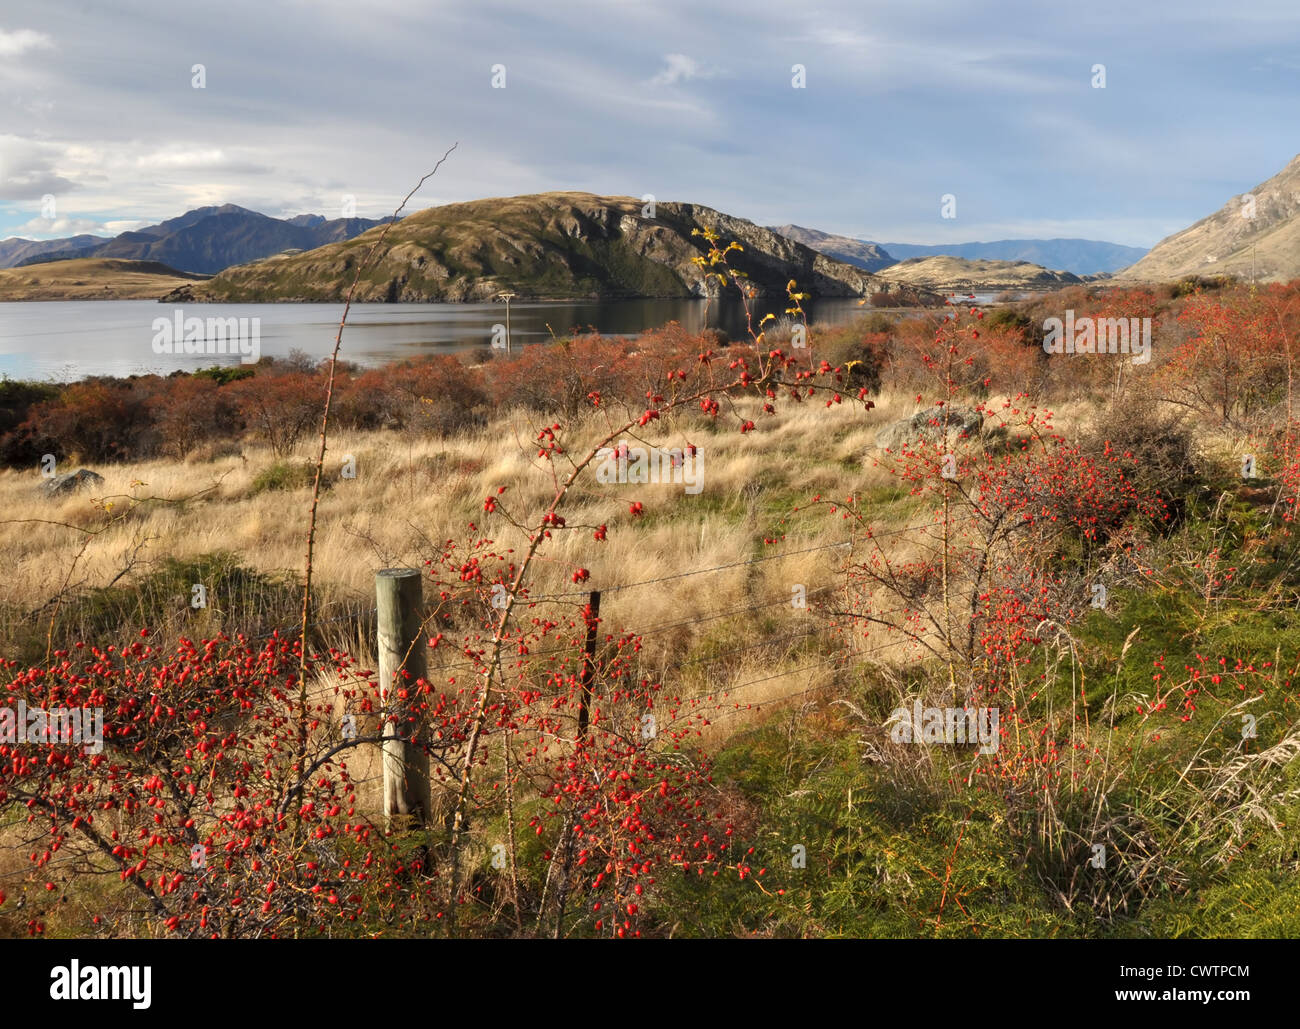 Wild red Rose Hips bushes and berries in Autumn on the shores of Lake Wanaka in Central Otago, New Zealand. Stock Photo